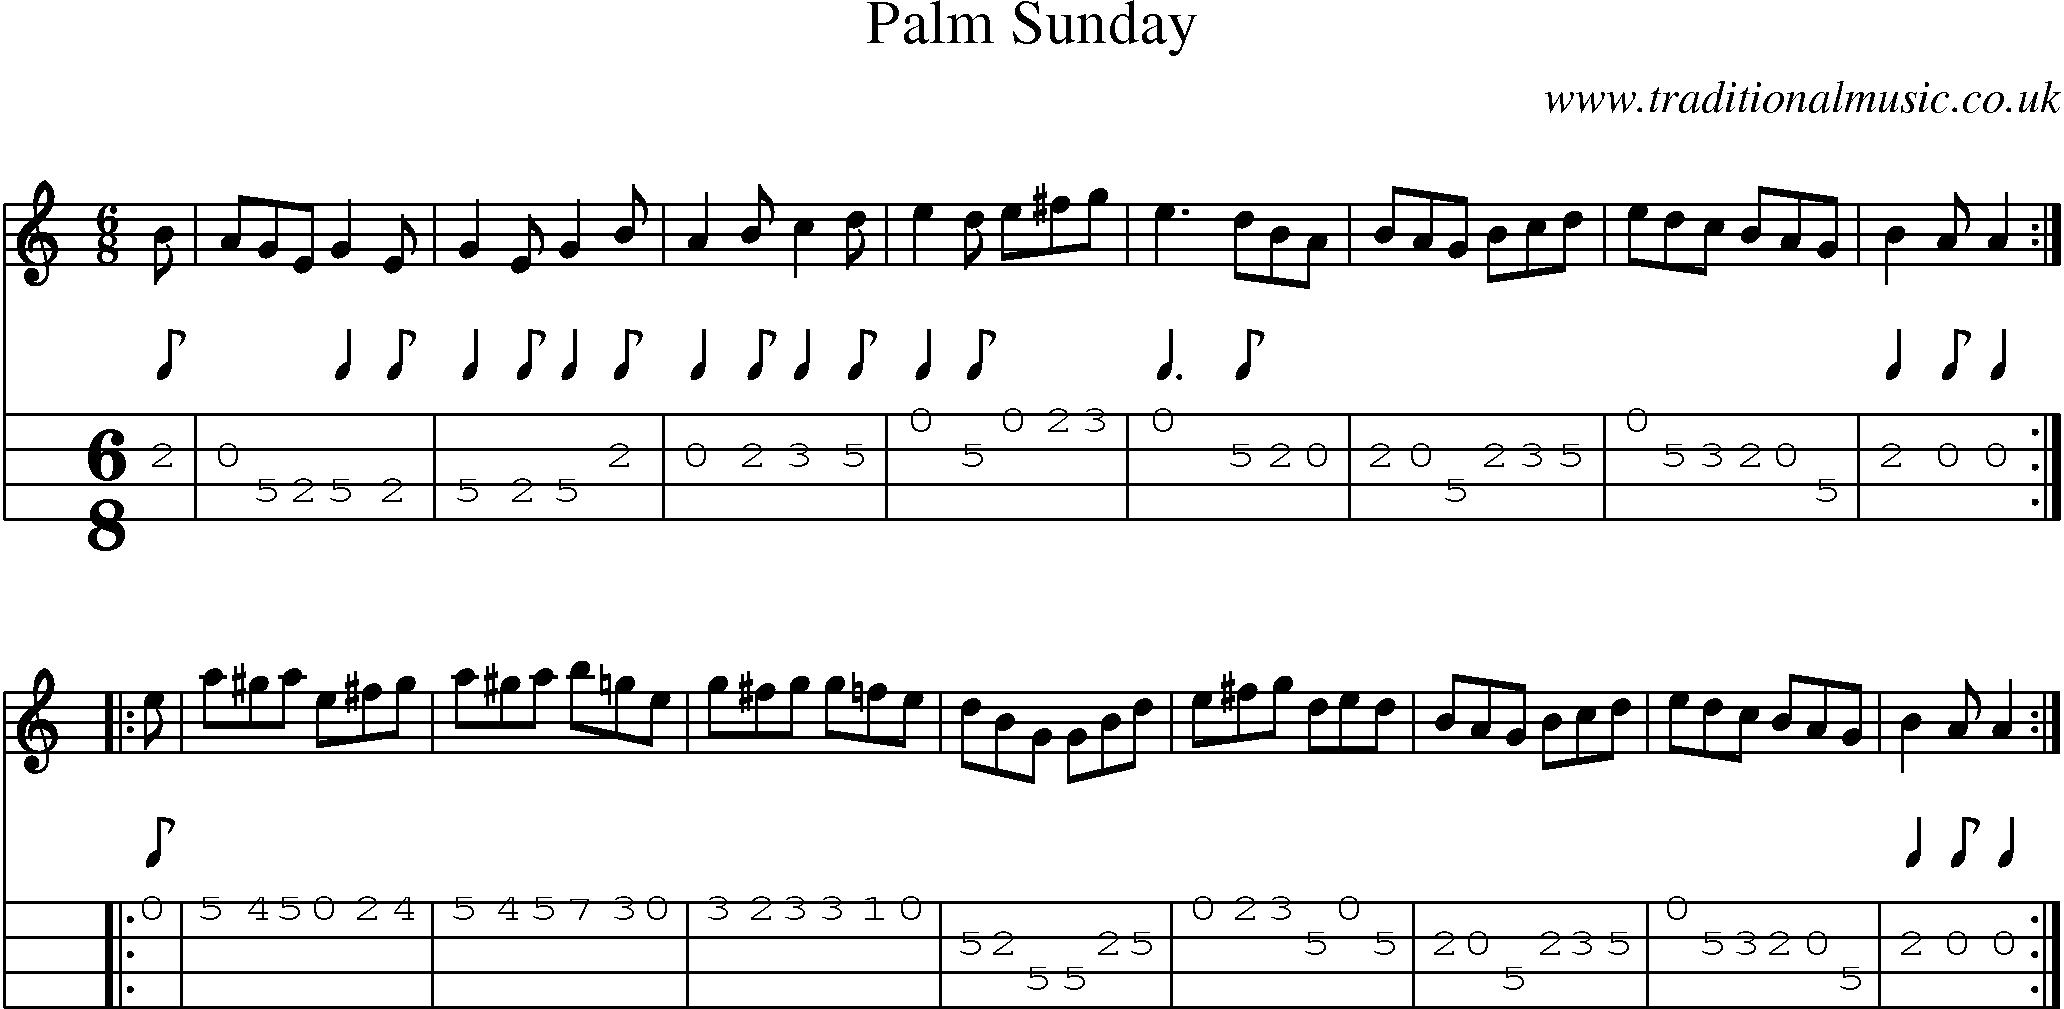 Music Score and Mandolin Tabs for Palm Sunday